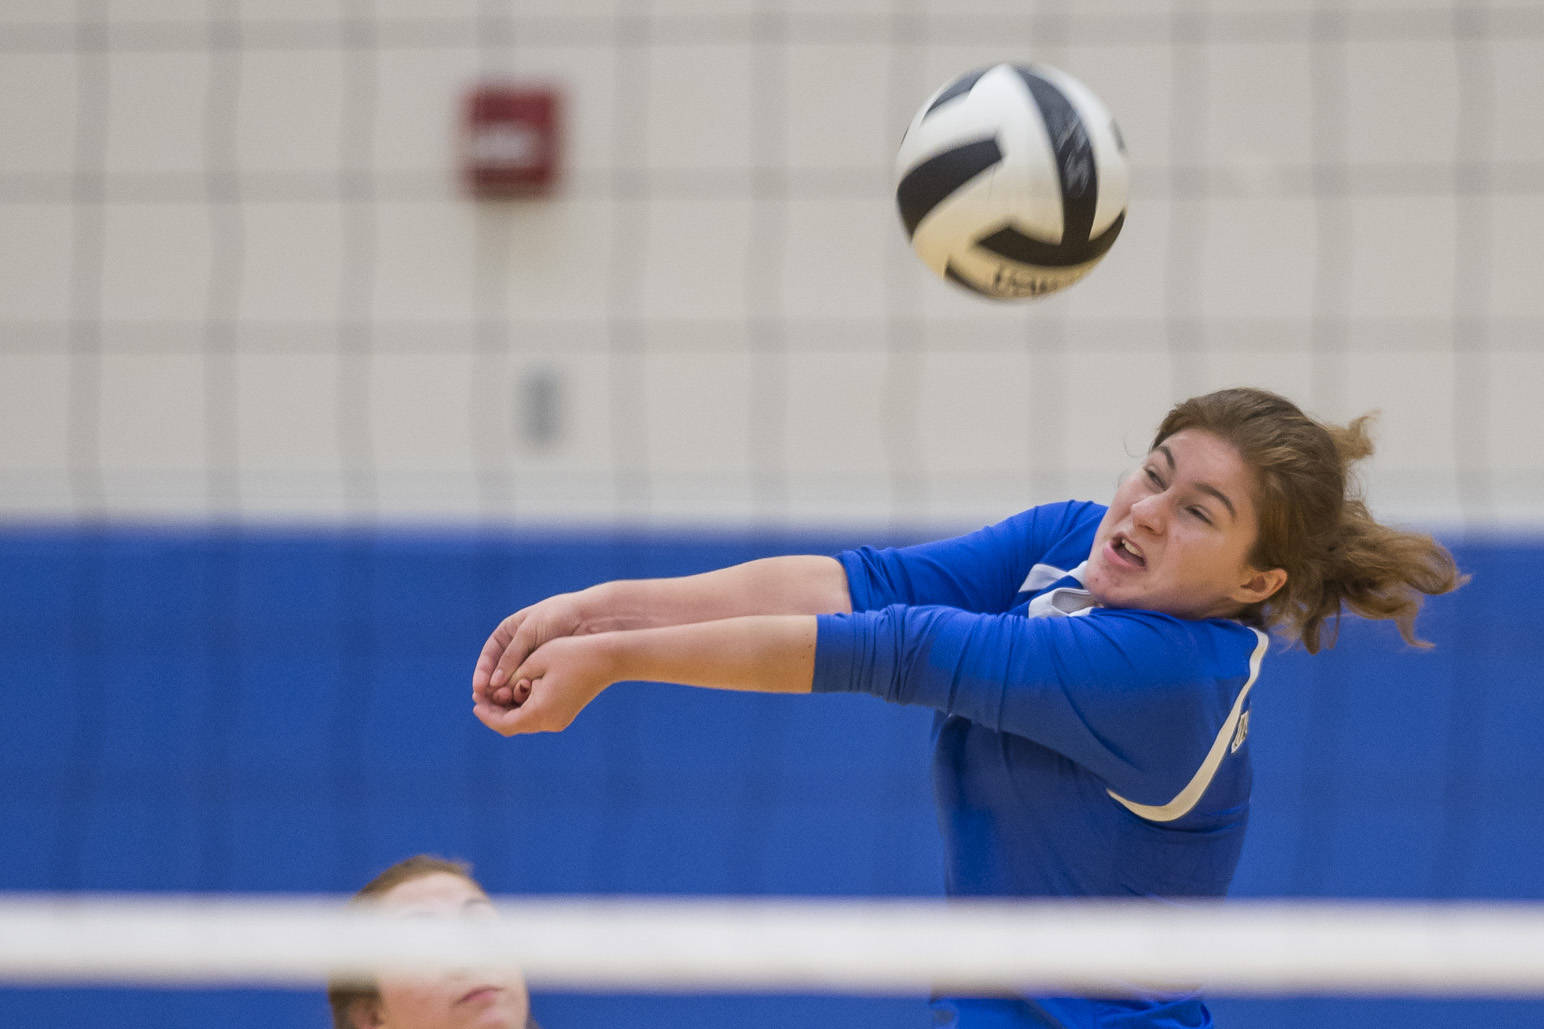 JDHS spikers 9th at Spiketacular, Thunder Mountain sweeps Kayhi